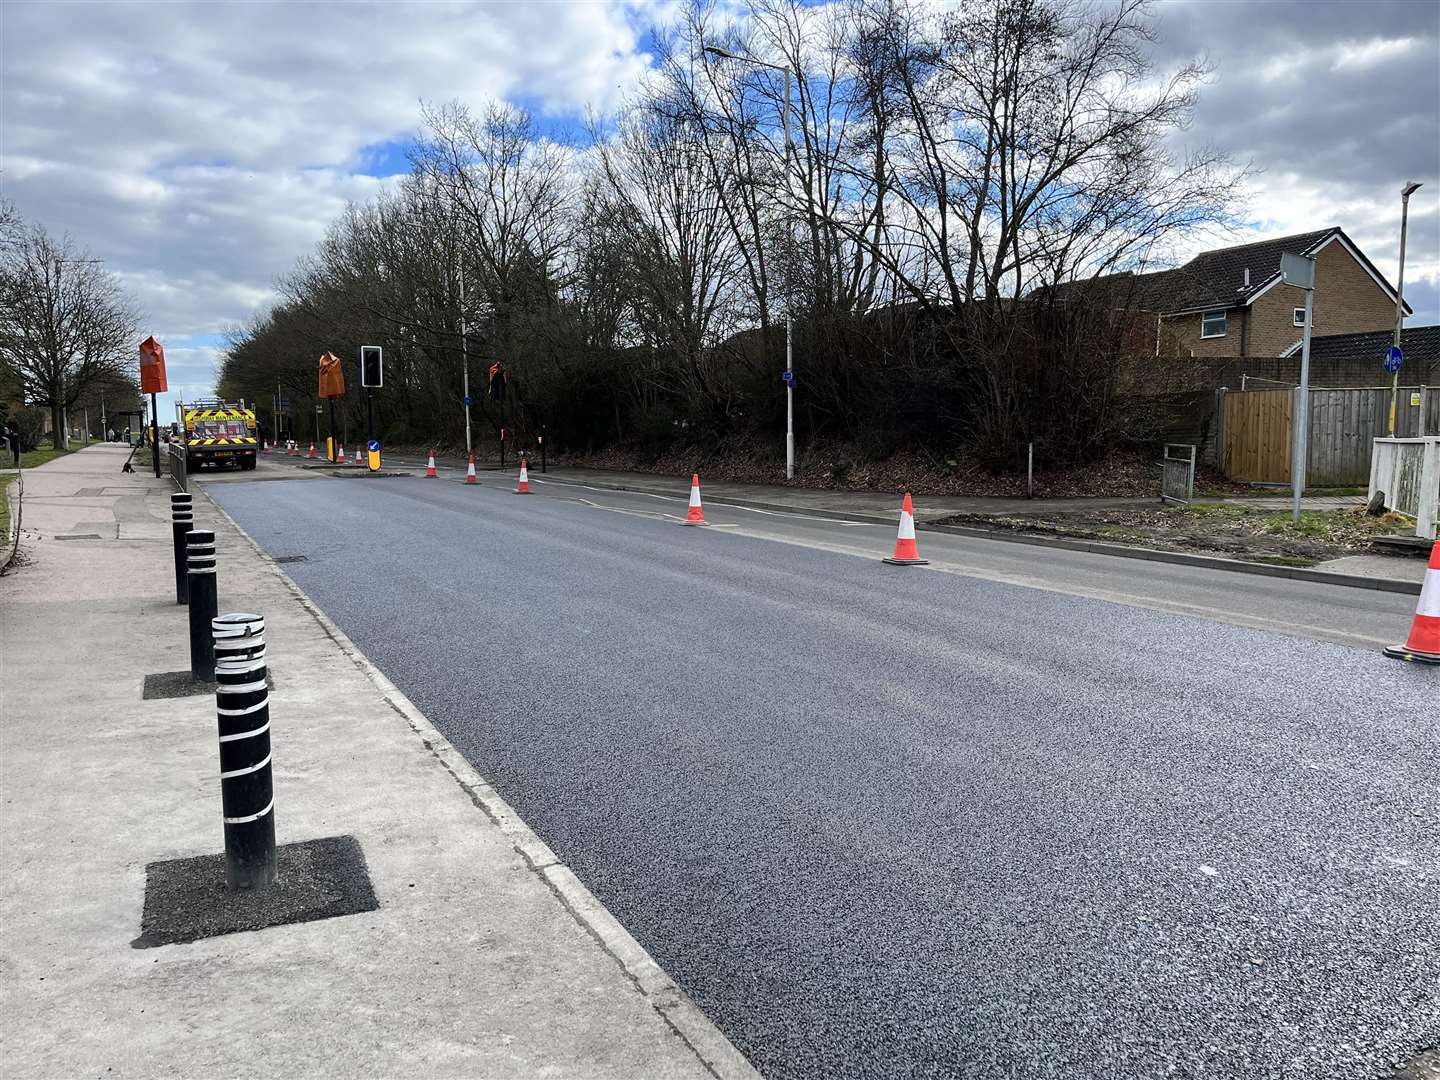 Brookfield Road in Ashford has been repaired after "horrendous" potholes developed